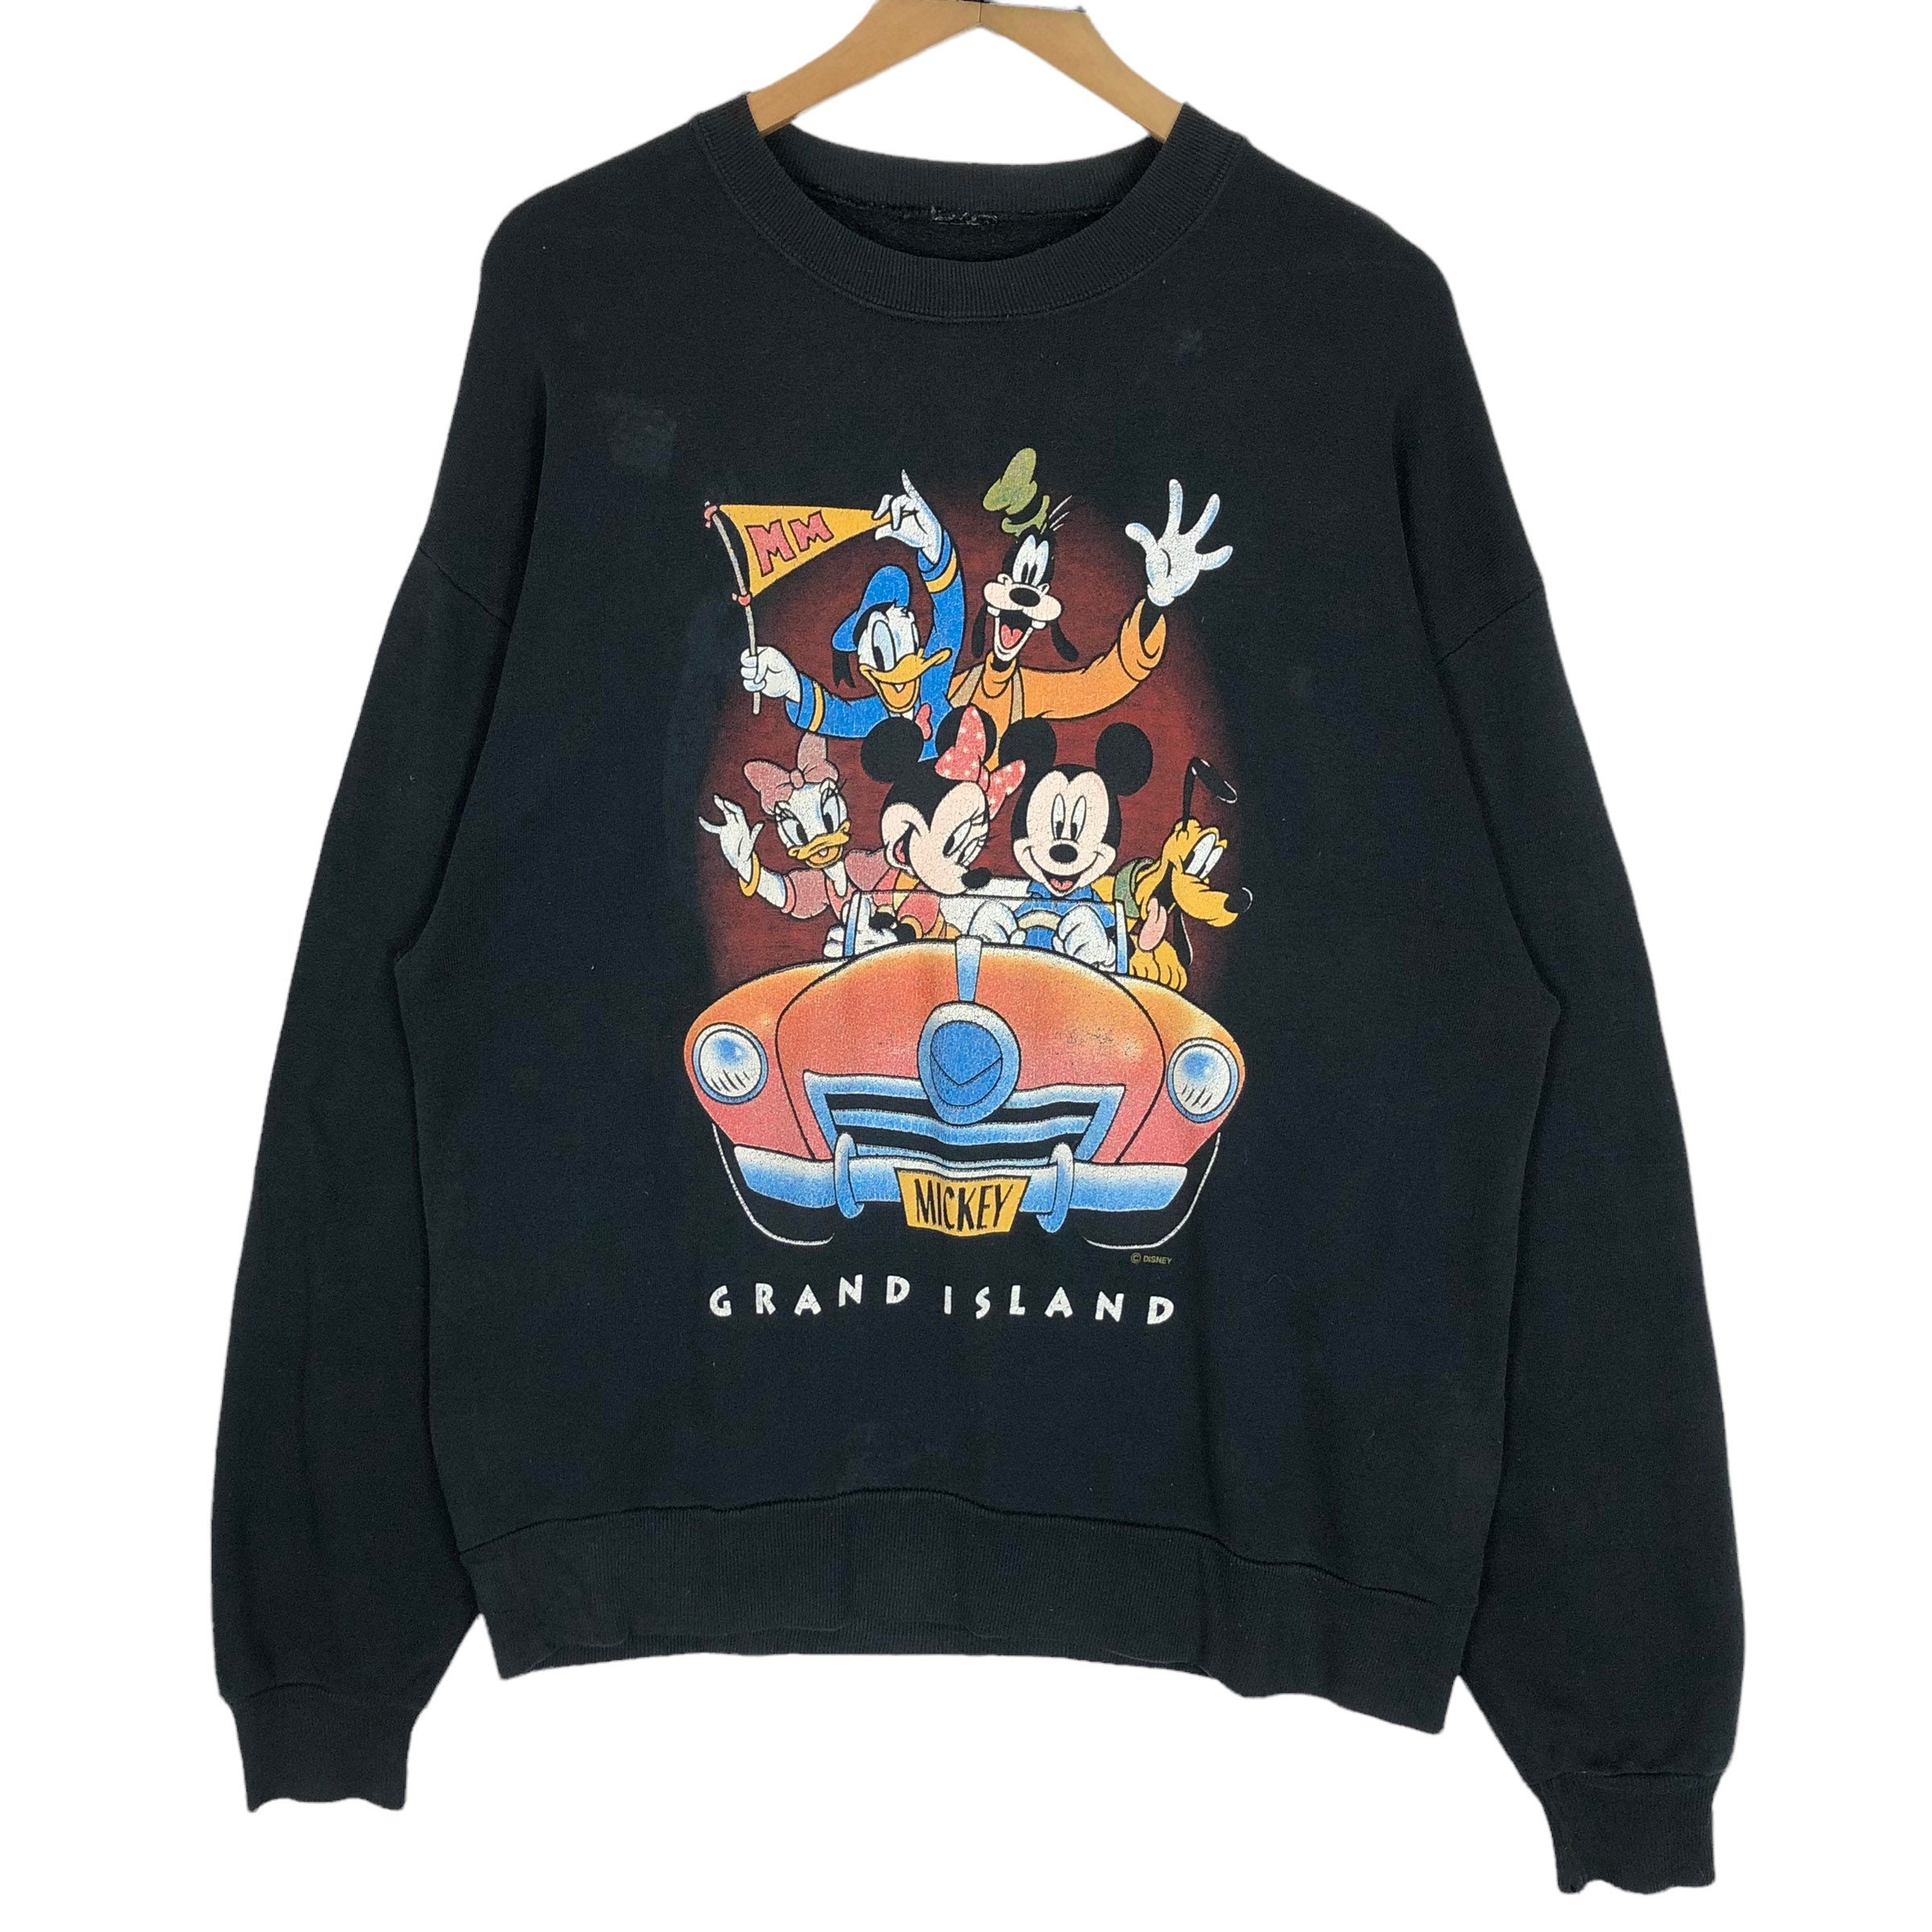 Vintage Disney Mickey Golf Sweater By Lario Italy Lmtd Edition Out Of 3000  Sz L